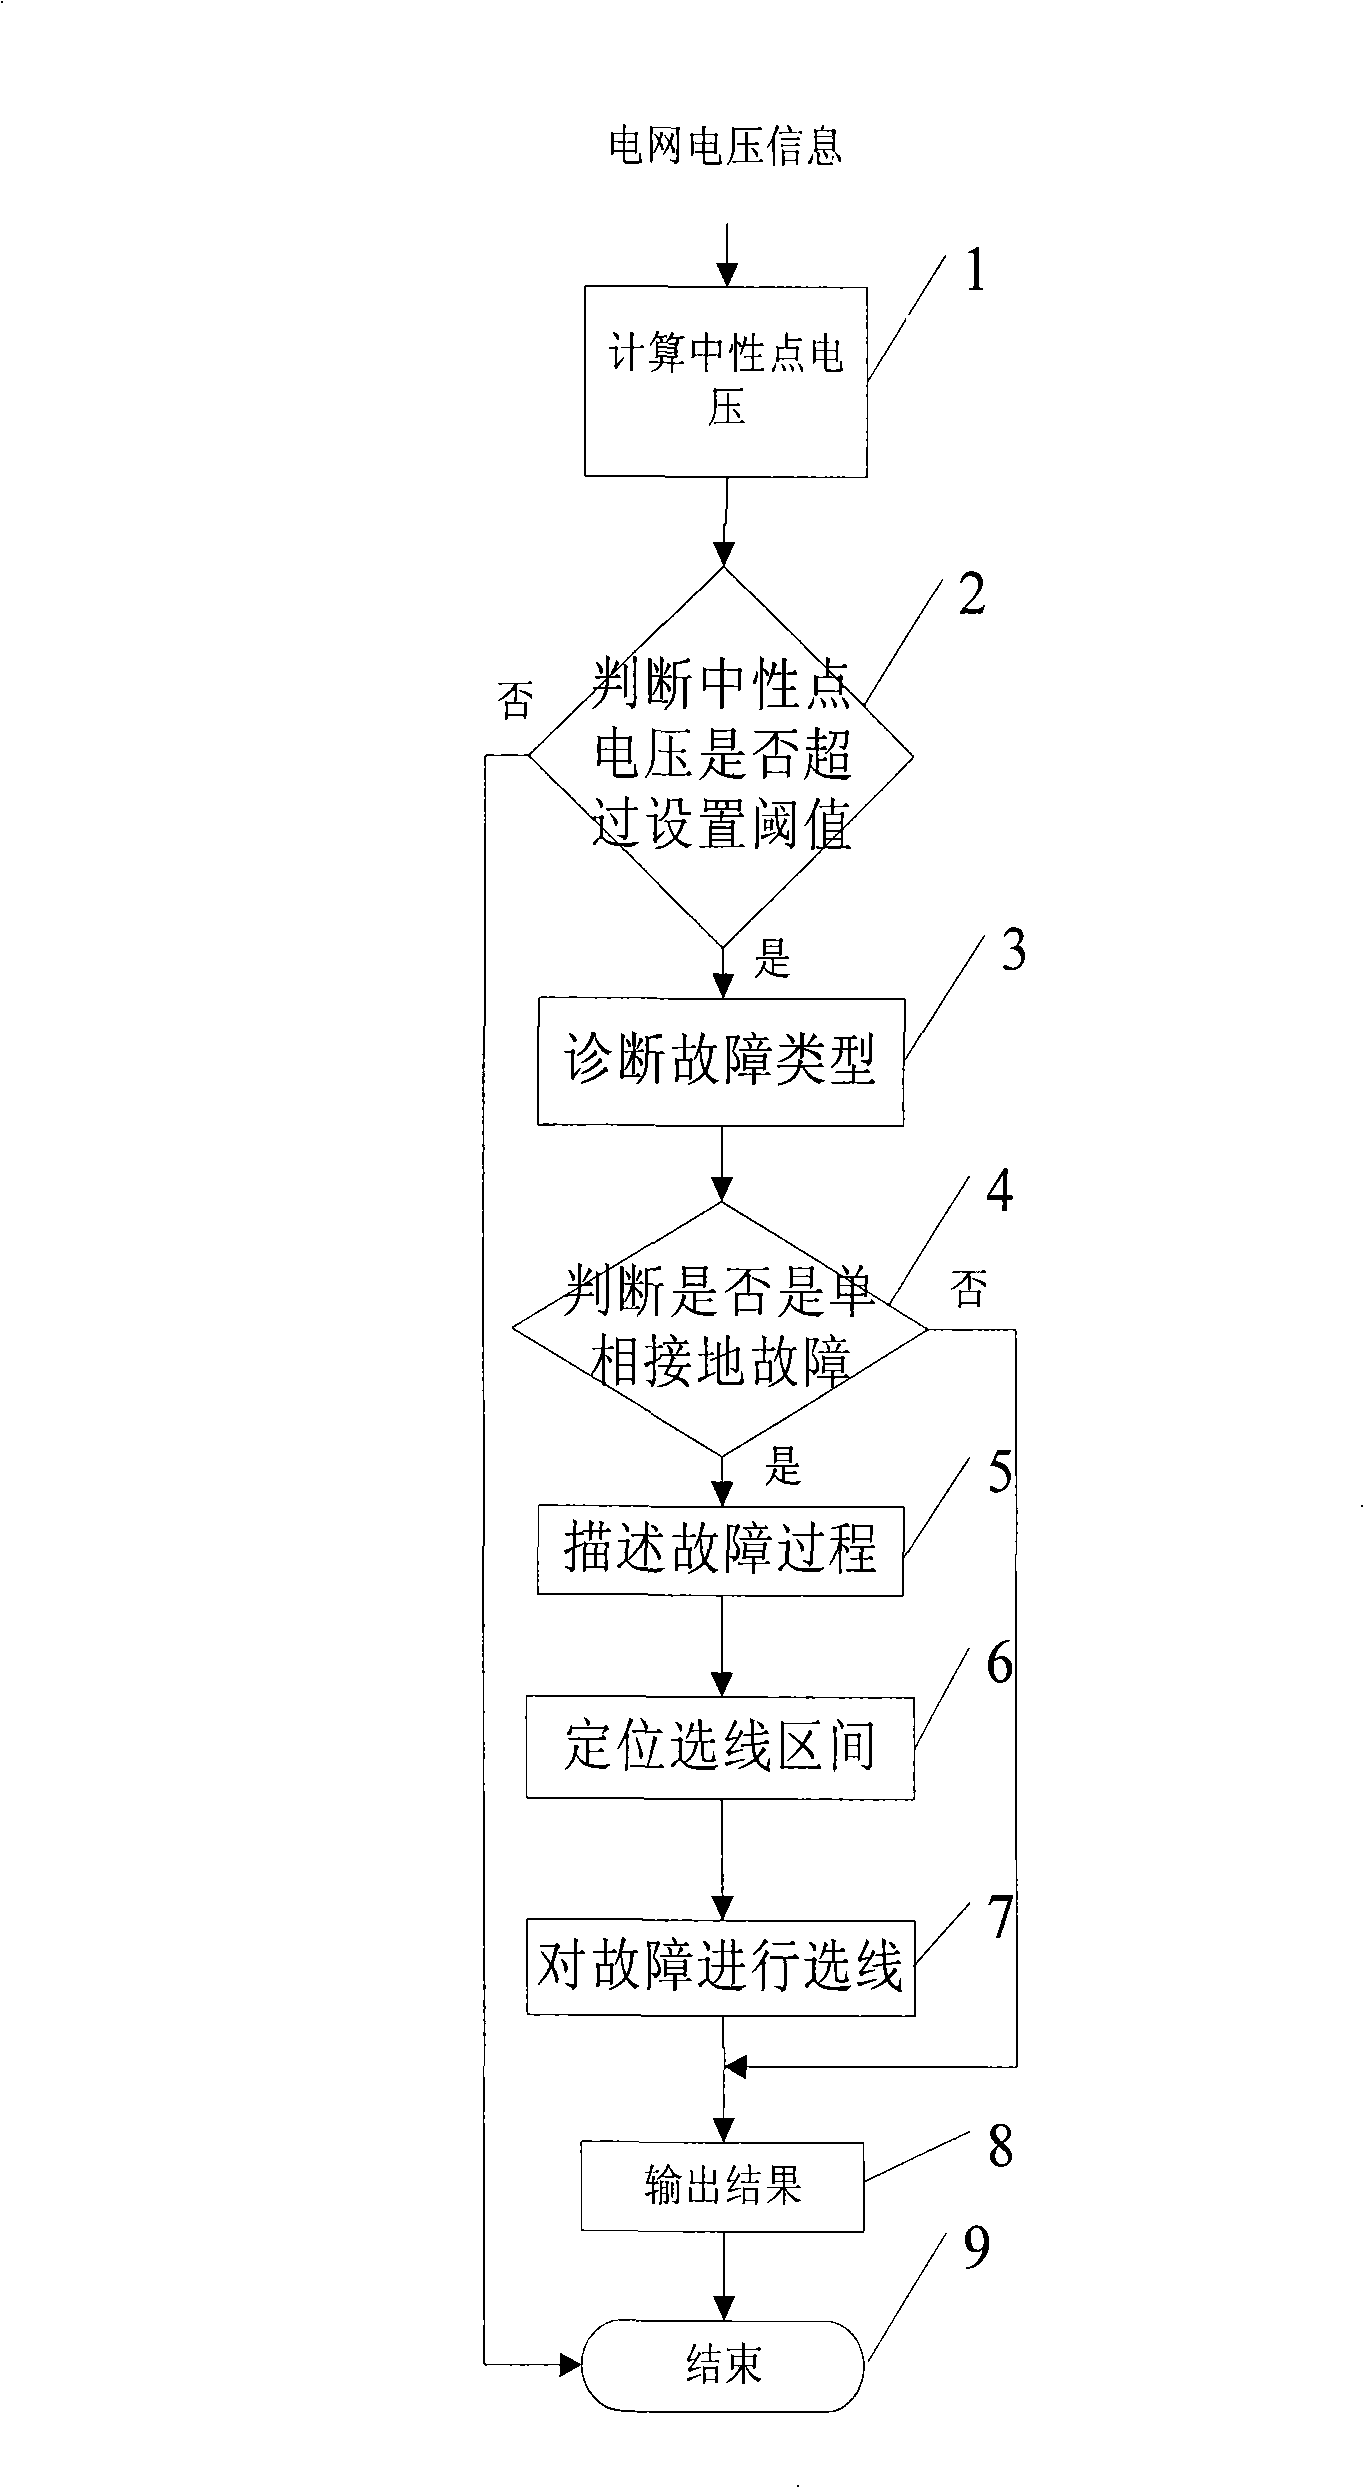 Medium-voltage power distribution network single-phase ground fault route selection method based on fault procedure analysis